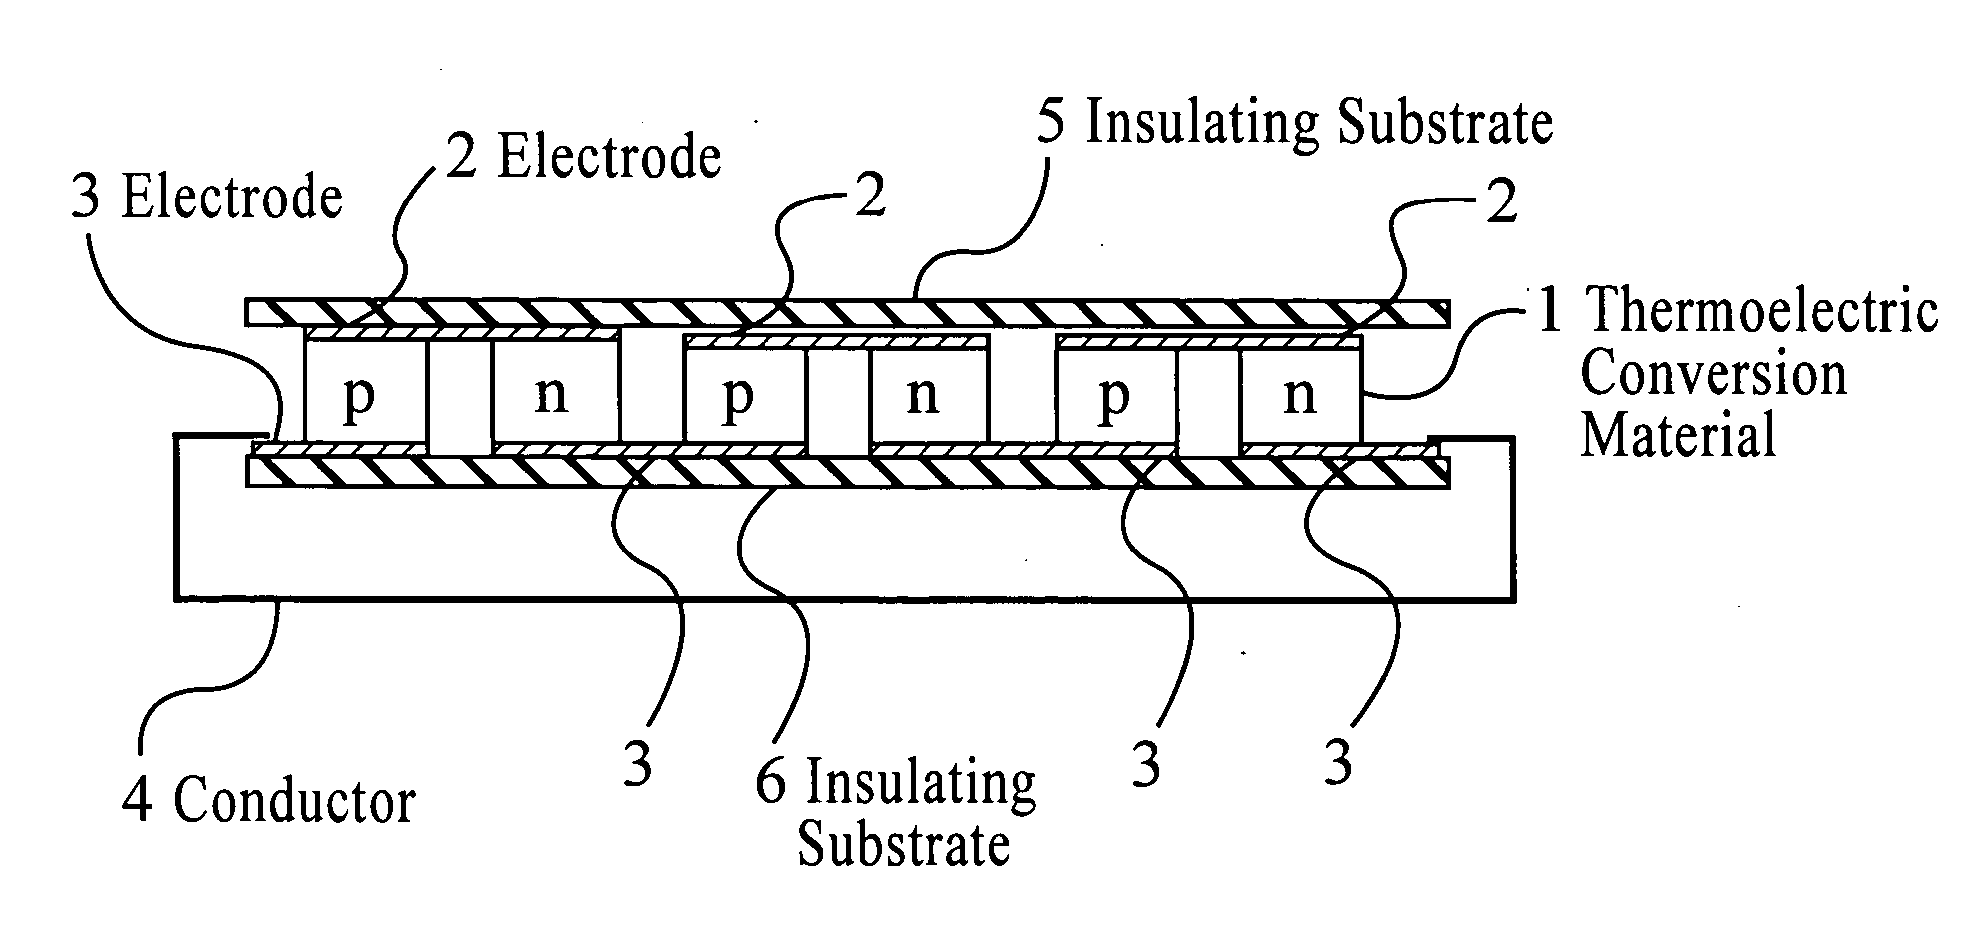 Cooling device for electronic component using thermo-electric conversion material